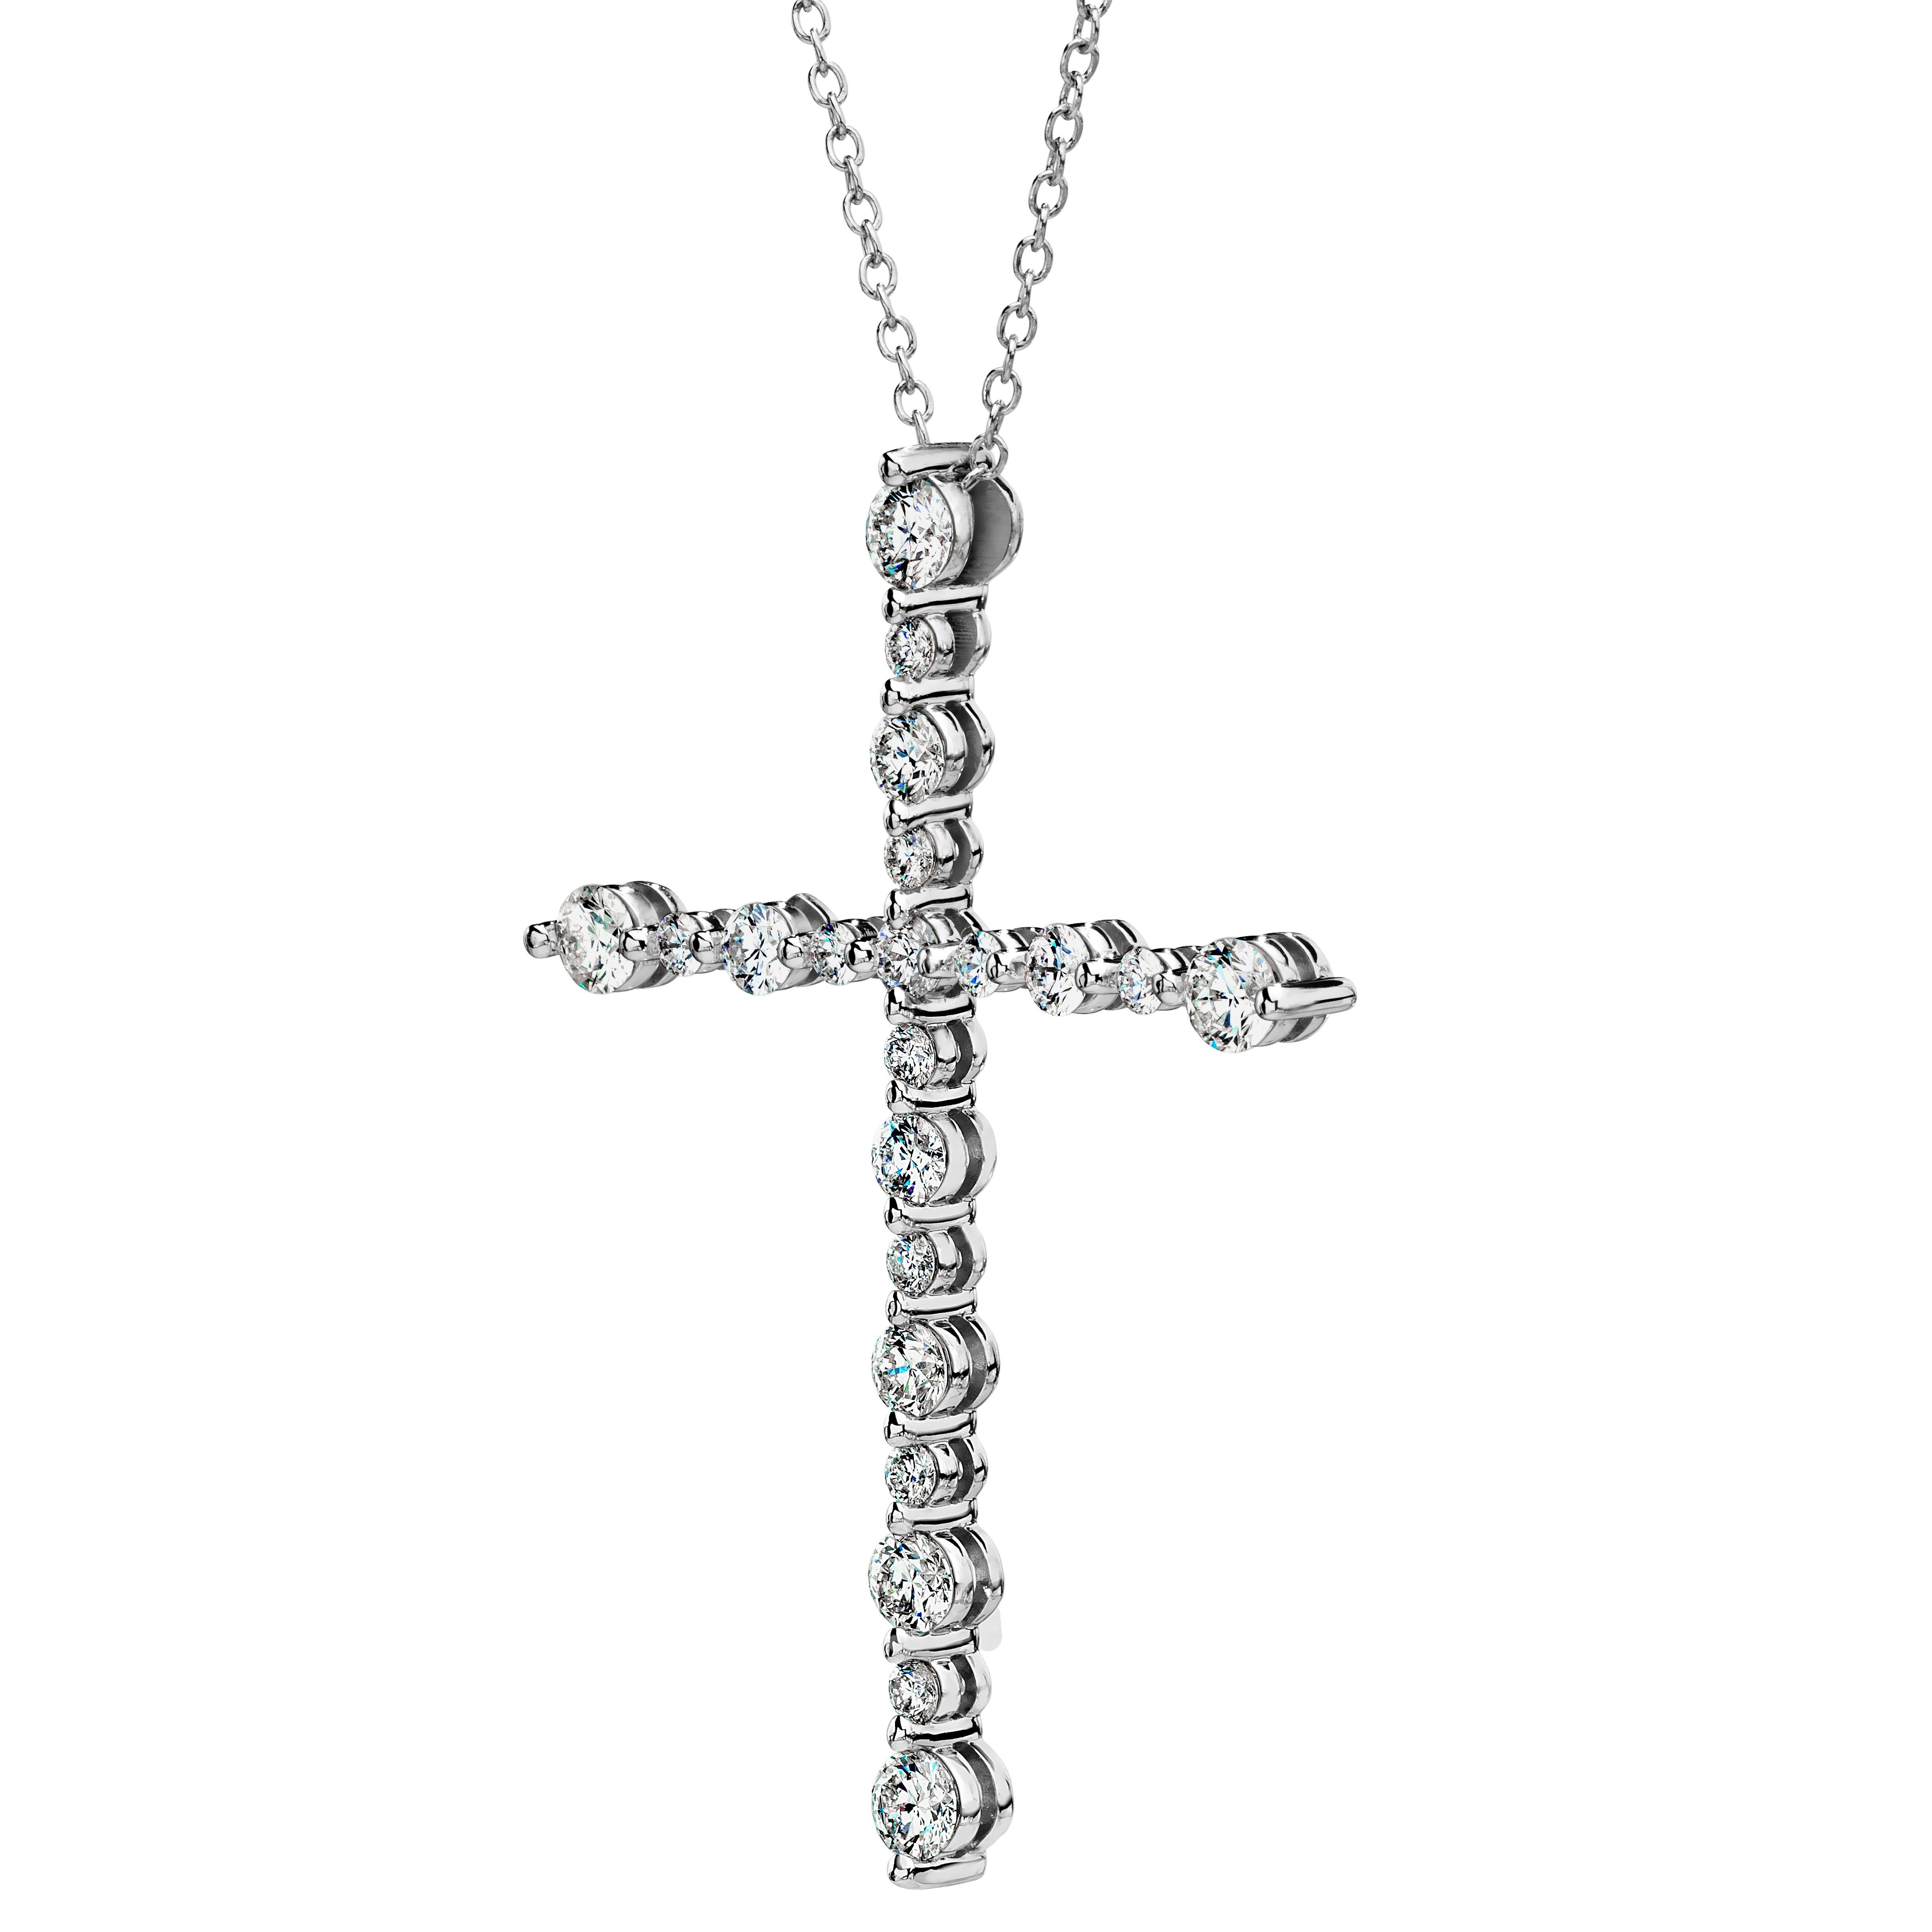 Metal: 18K White Gold
Diamond Shape: Round Brilliant 
Total Diamond Weight: 2.00 CTW
Number of Diamonds: 21
Clarity: Very Slightly Included ( VS2 )
Color: Near Colorless ( I )

16